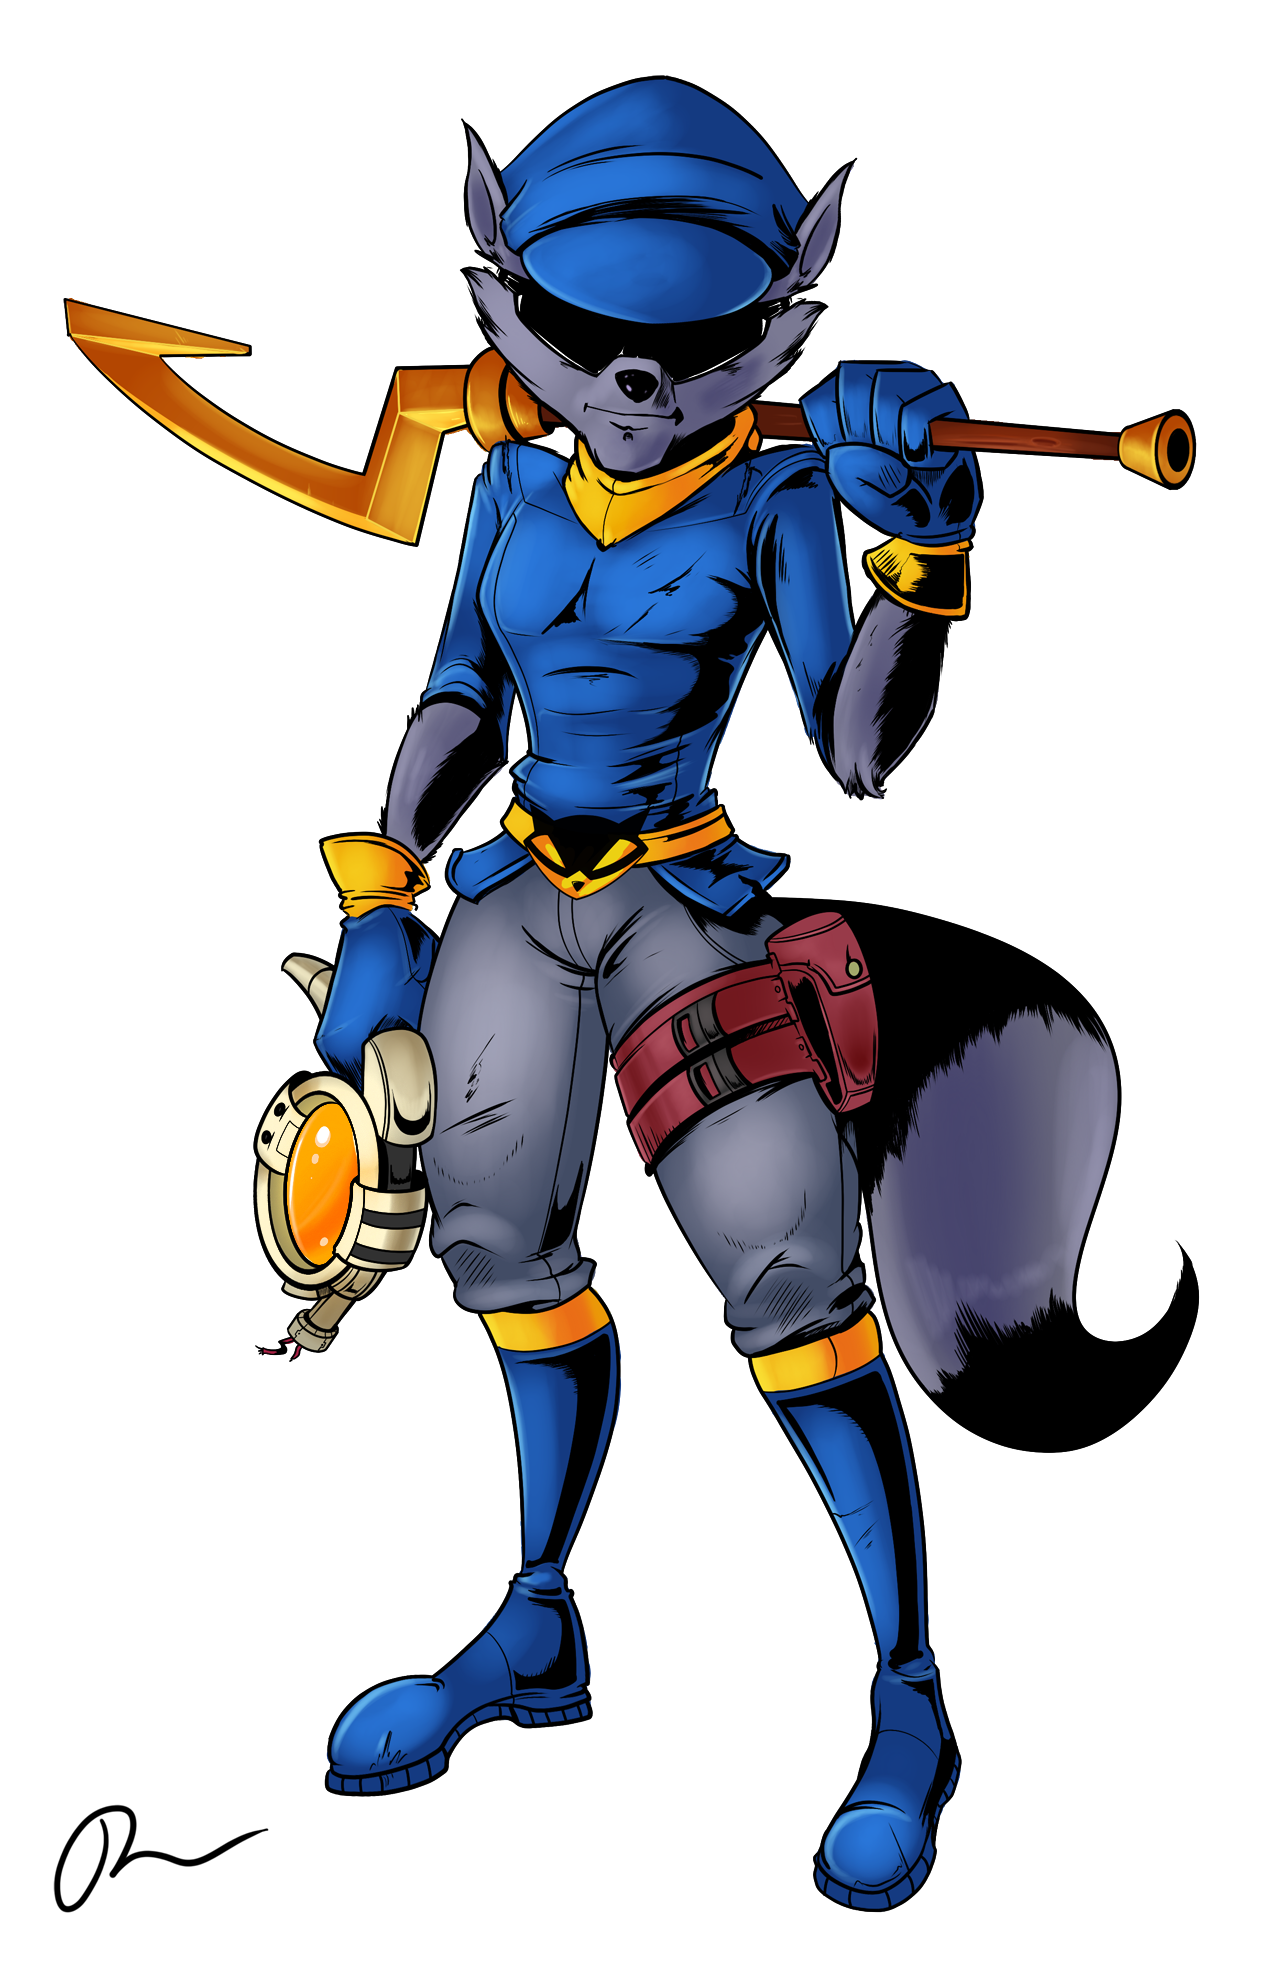 Sly Cooper 5 - A Thief's Legacy: Sly Cooper by GreenGuy-DA on